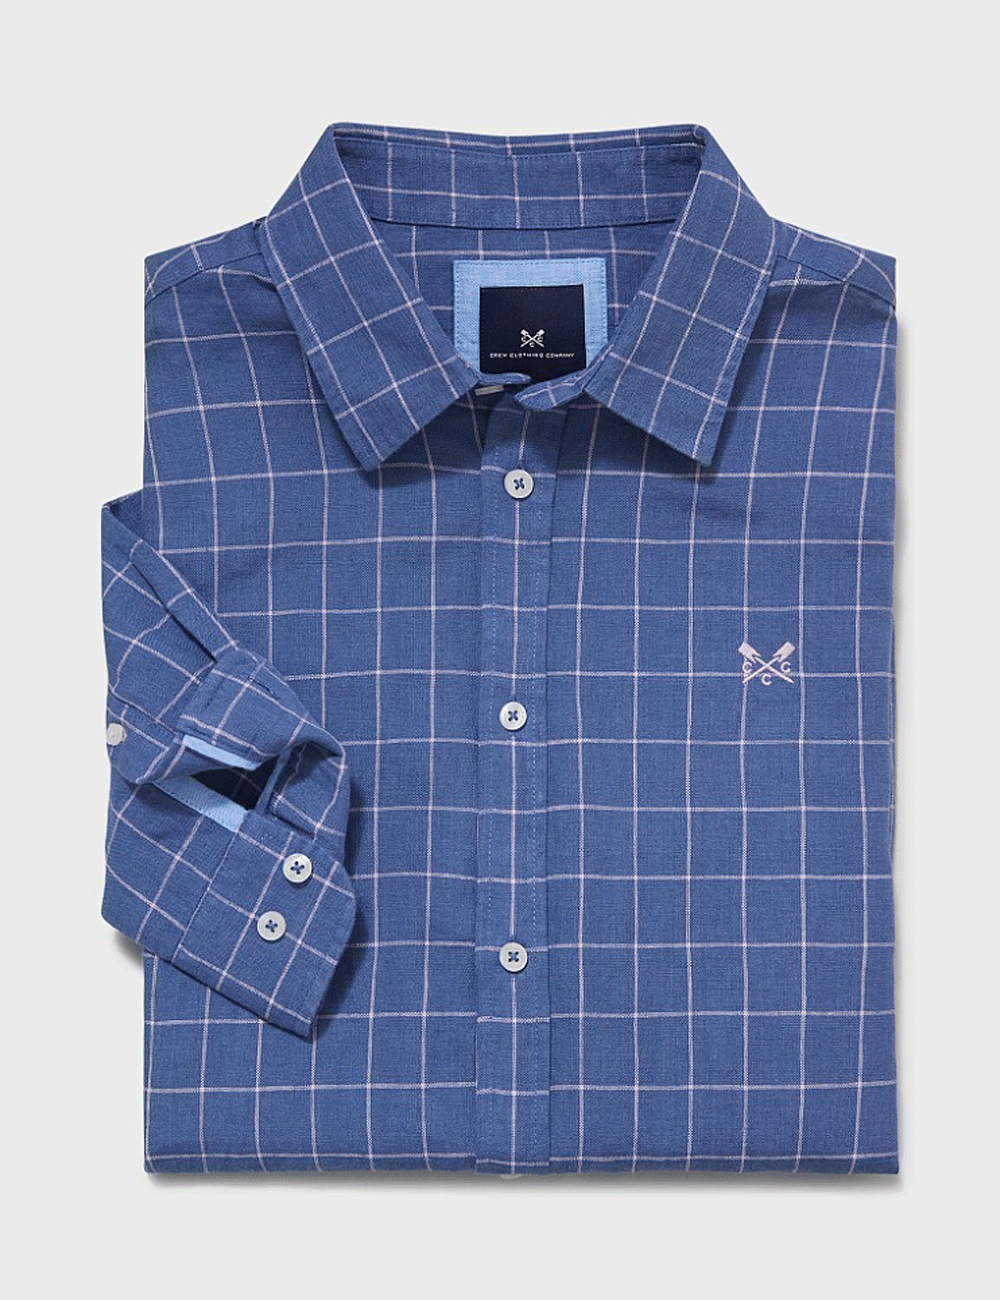 Crew Clothing's Grid Check Shirt in Blue on a grey background